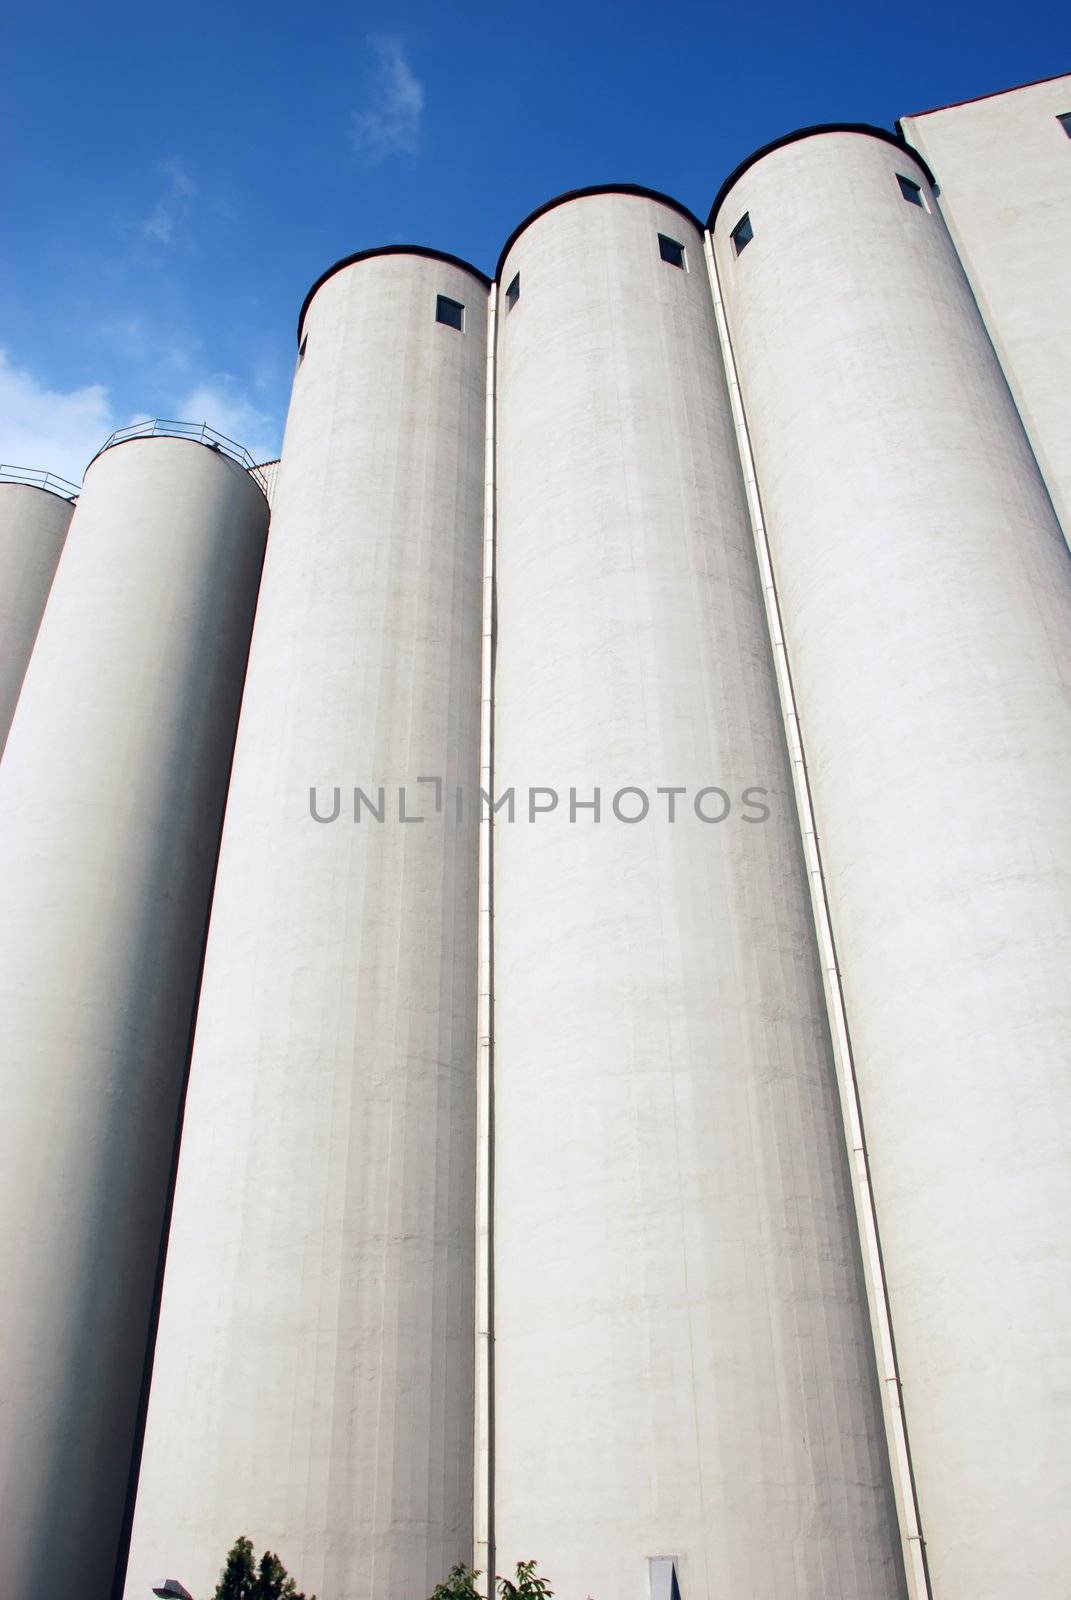 White tall industrial silo tower over blue sky